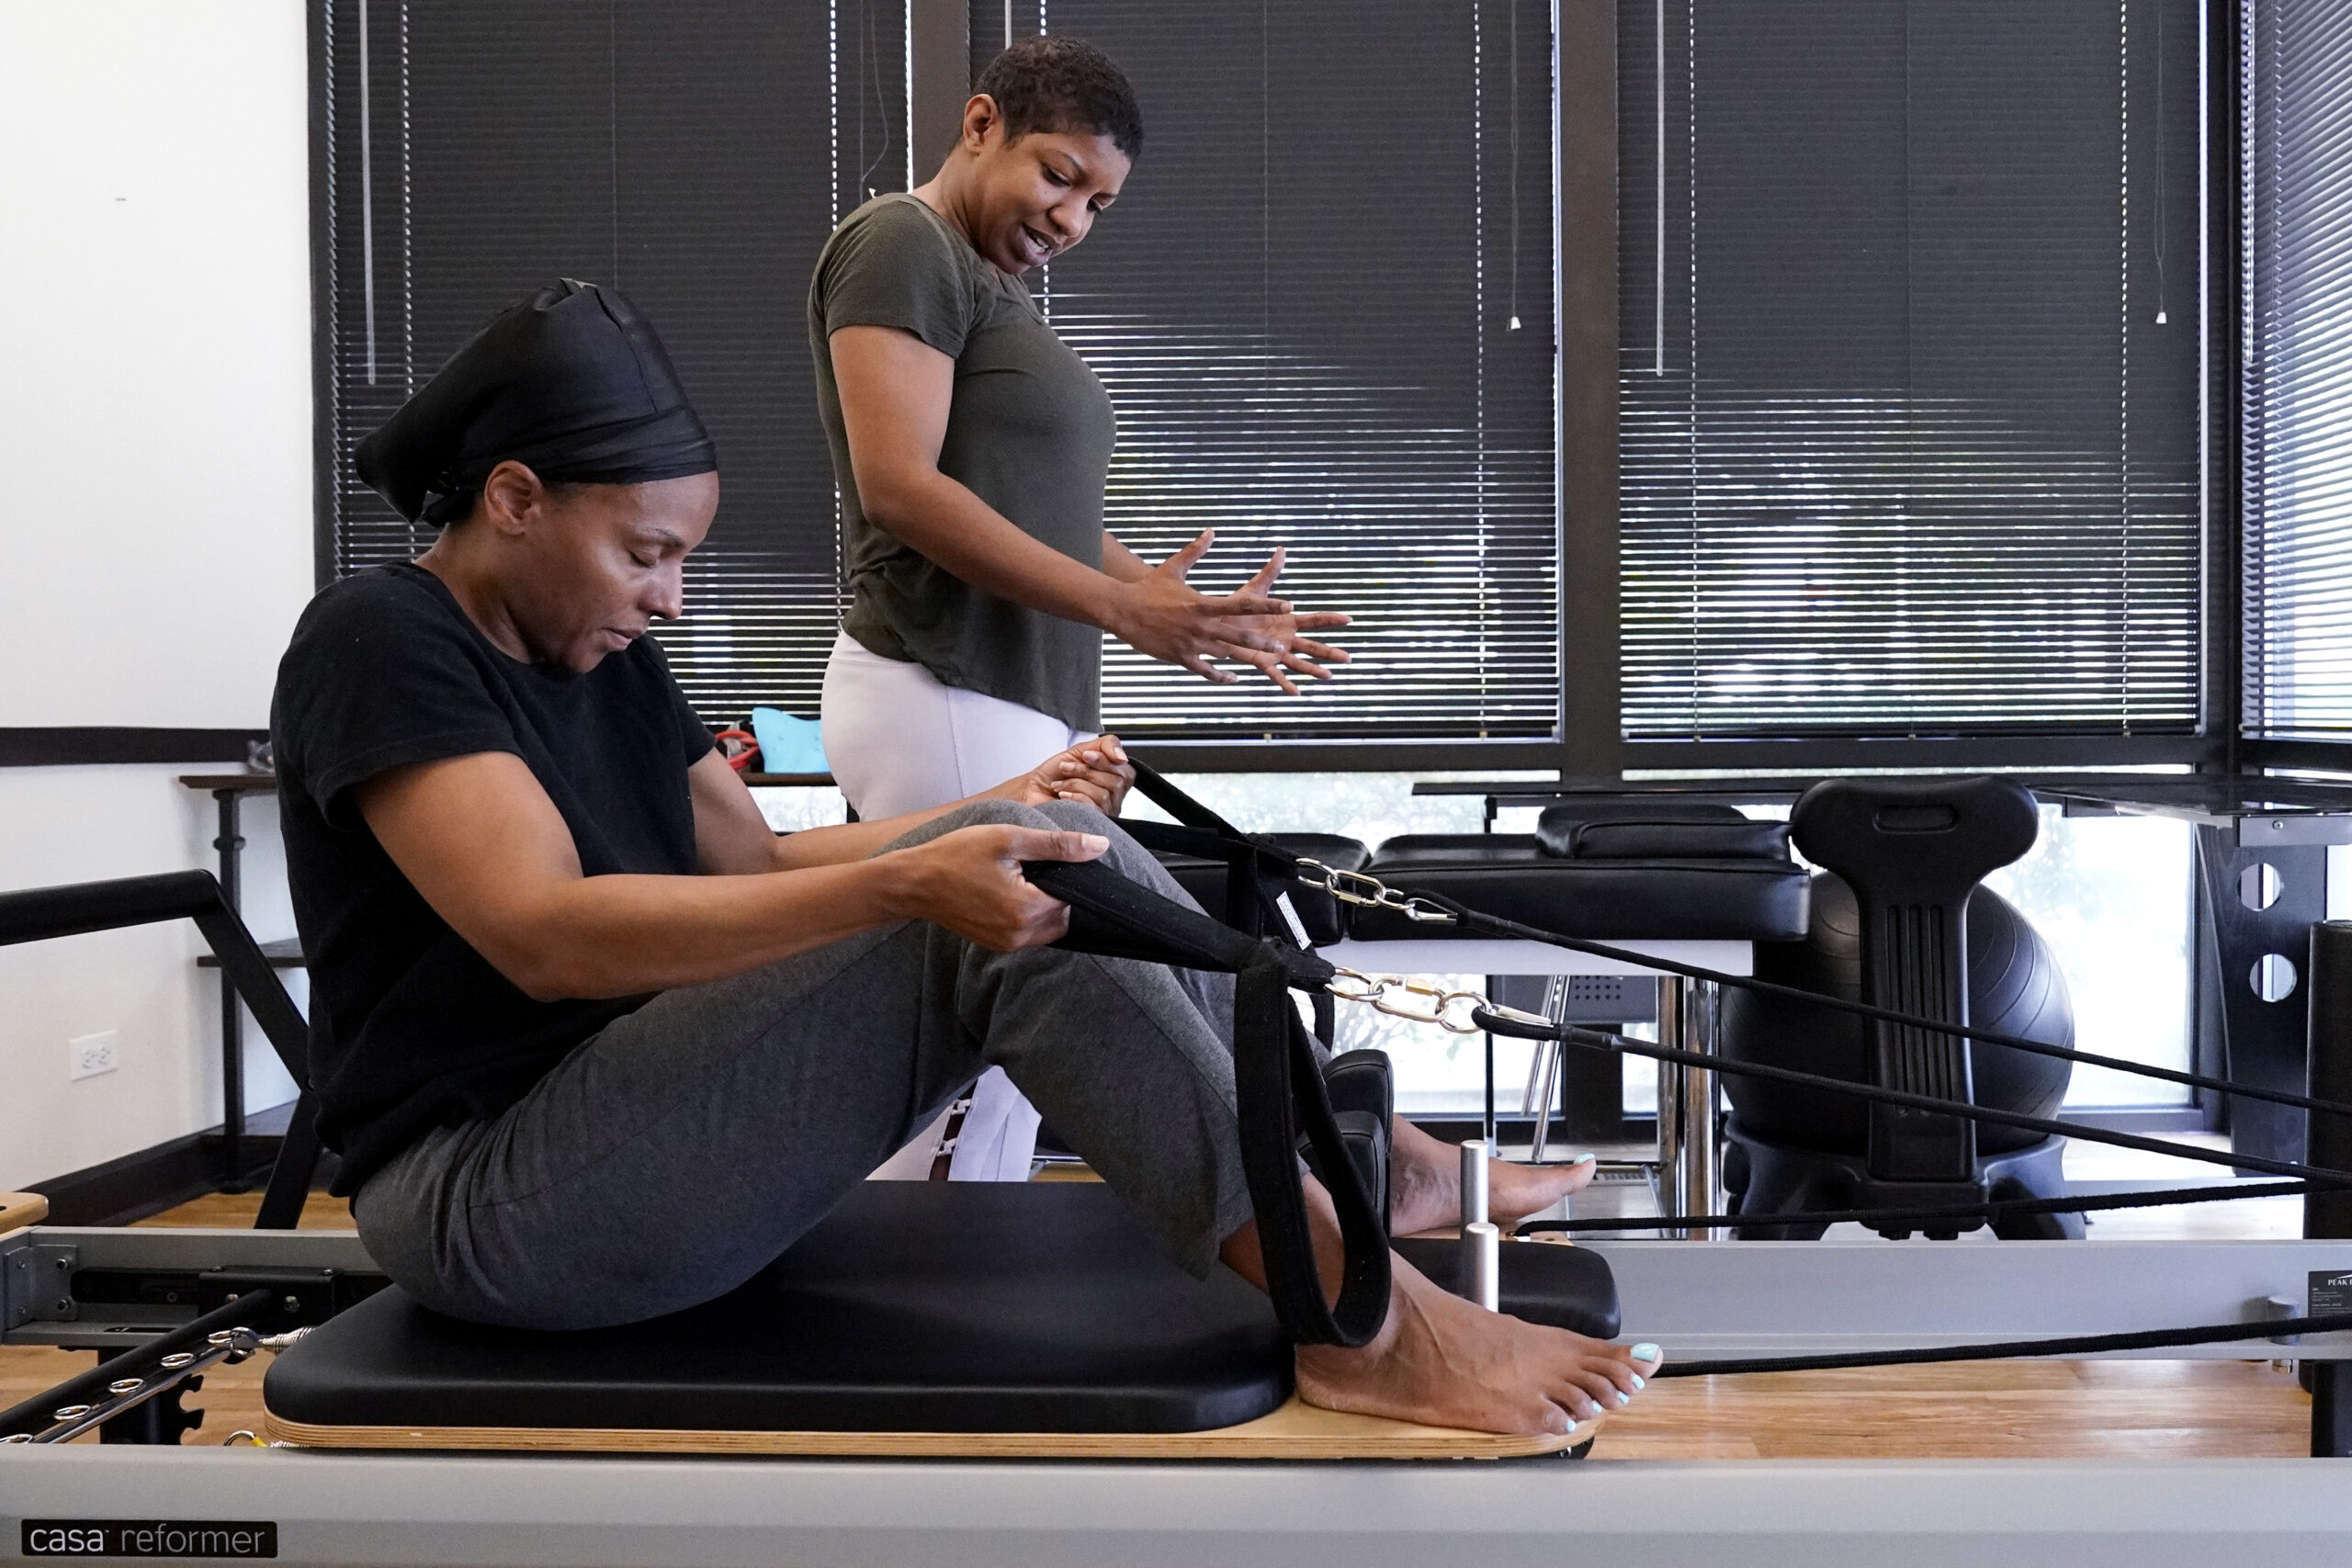 An instructor helps a patient do a Pilates exercise on a machine with cables.